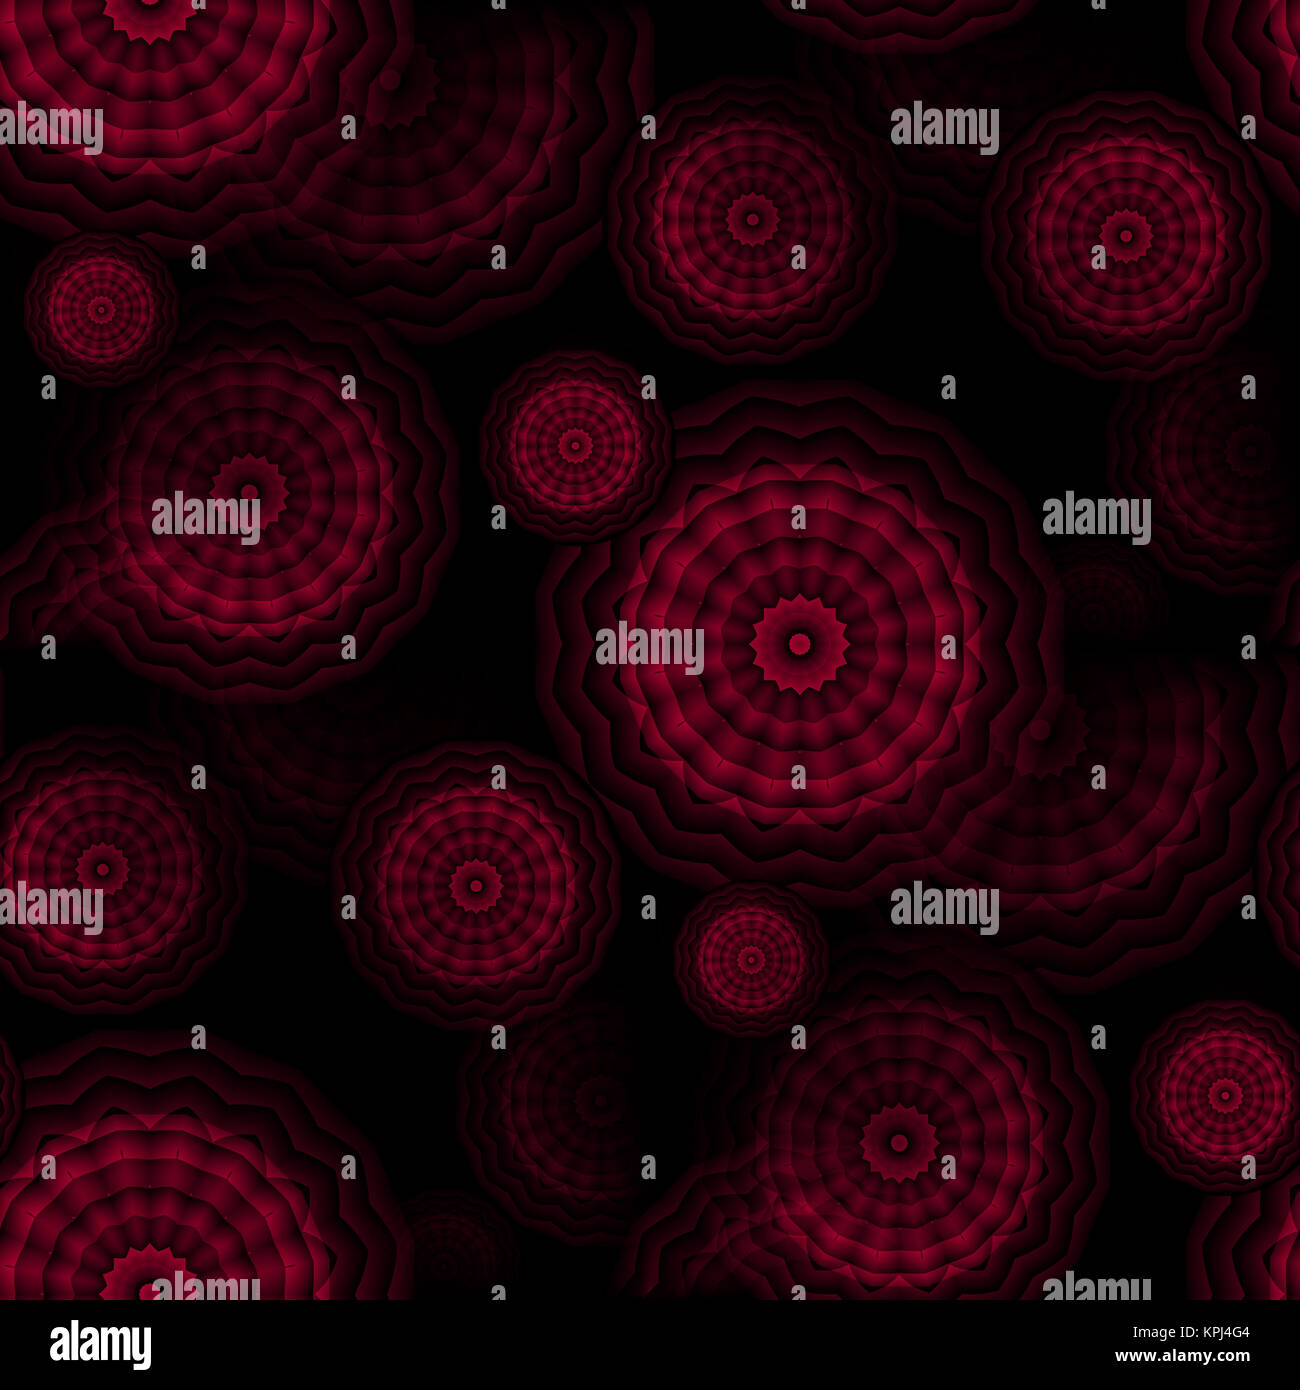 Abstract geometric seamless background. Scattered concentric circles pattern in dark red shades, dark brown and black. Stock Photo